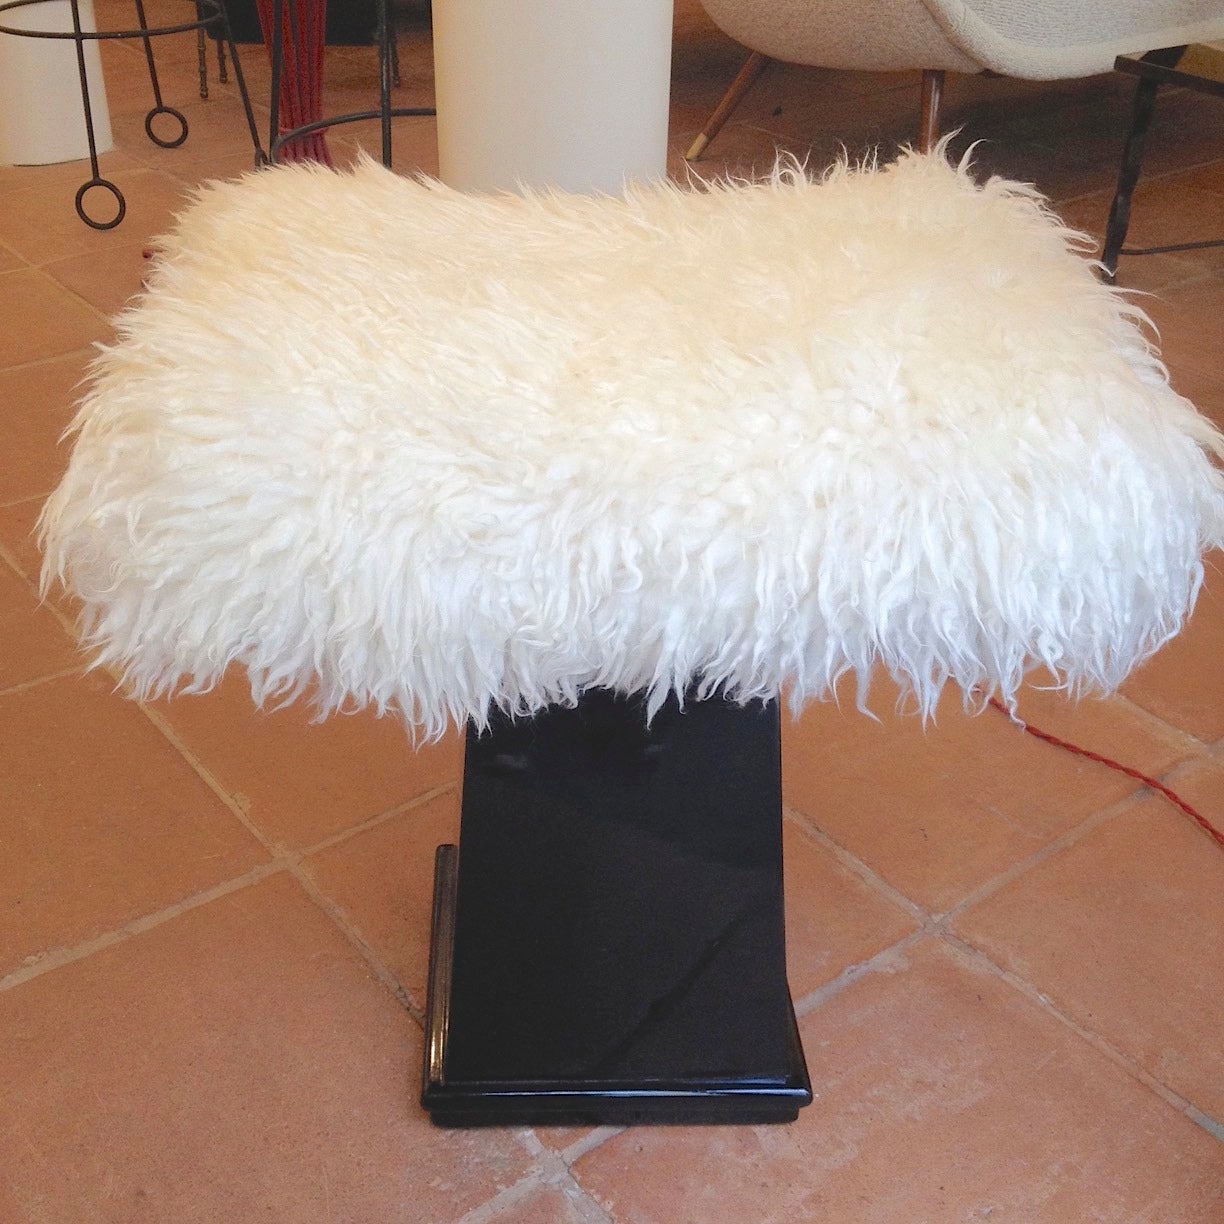 Spectacular Danish stool in black lacquered wood and real fur.